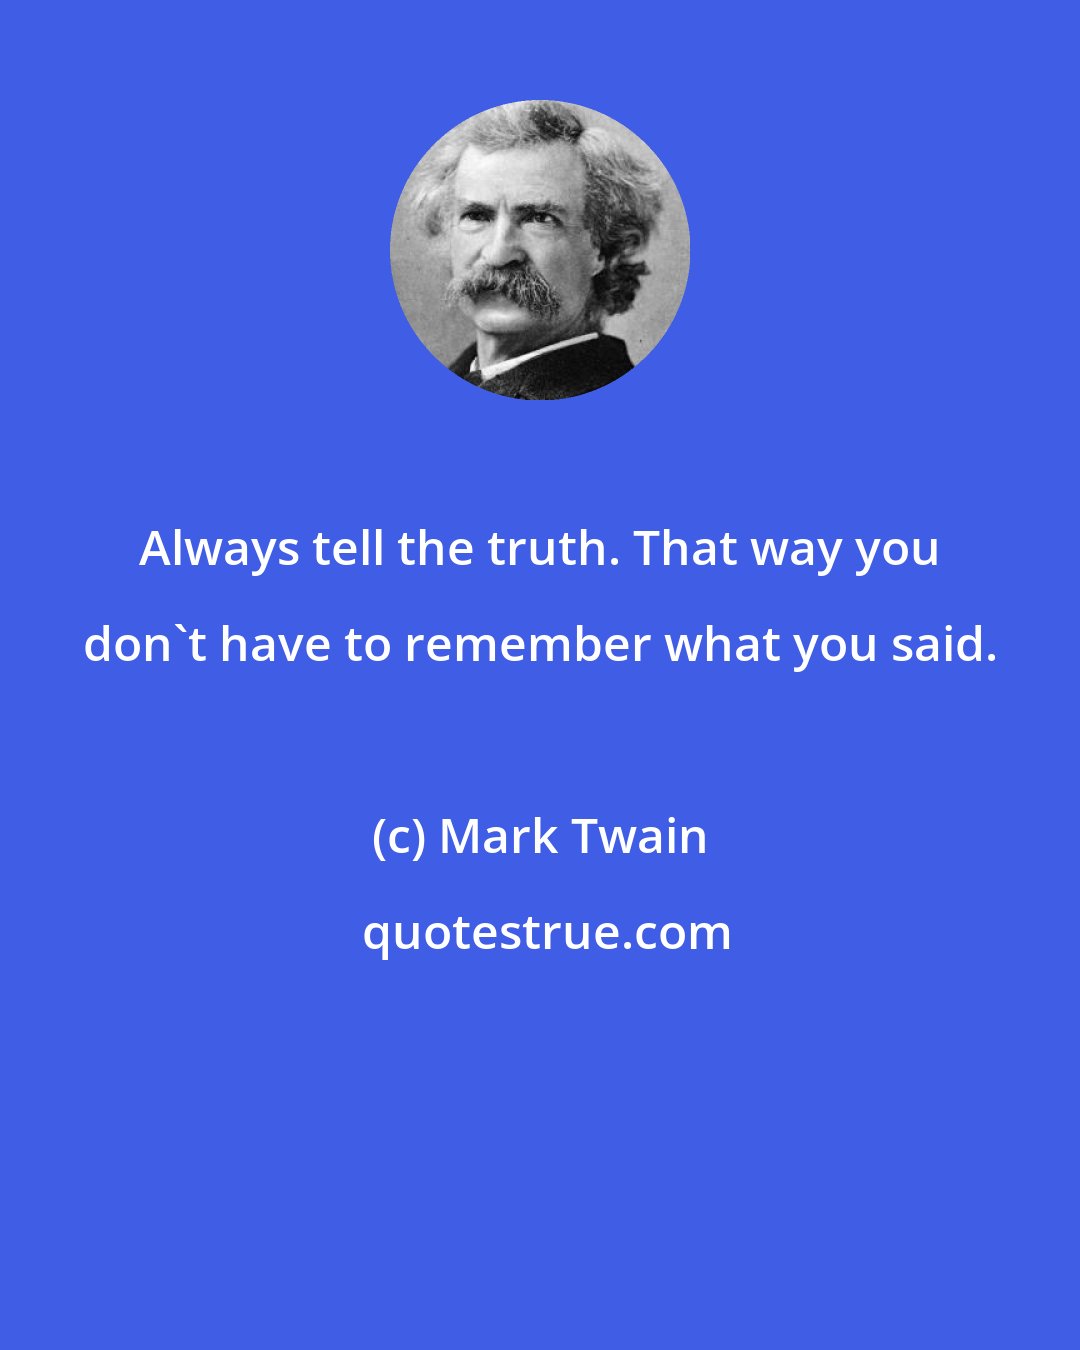 Mark Twain: Always tell the truth. That way you don't have to remember what you said.